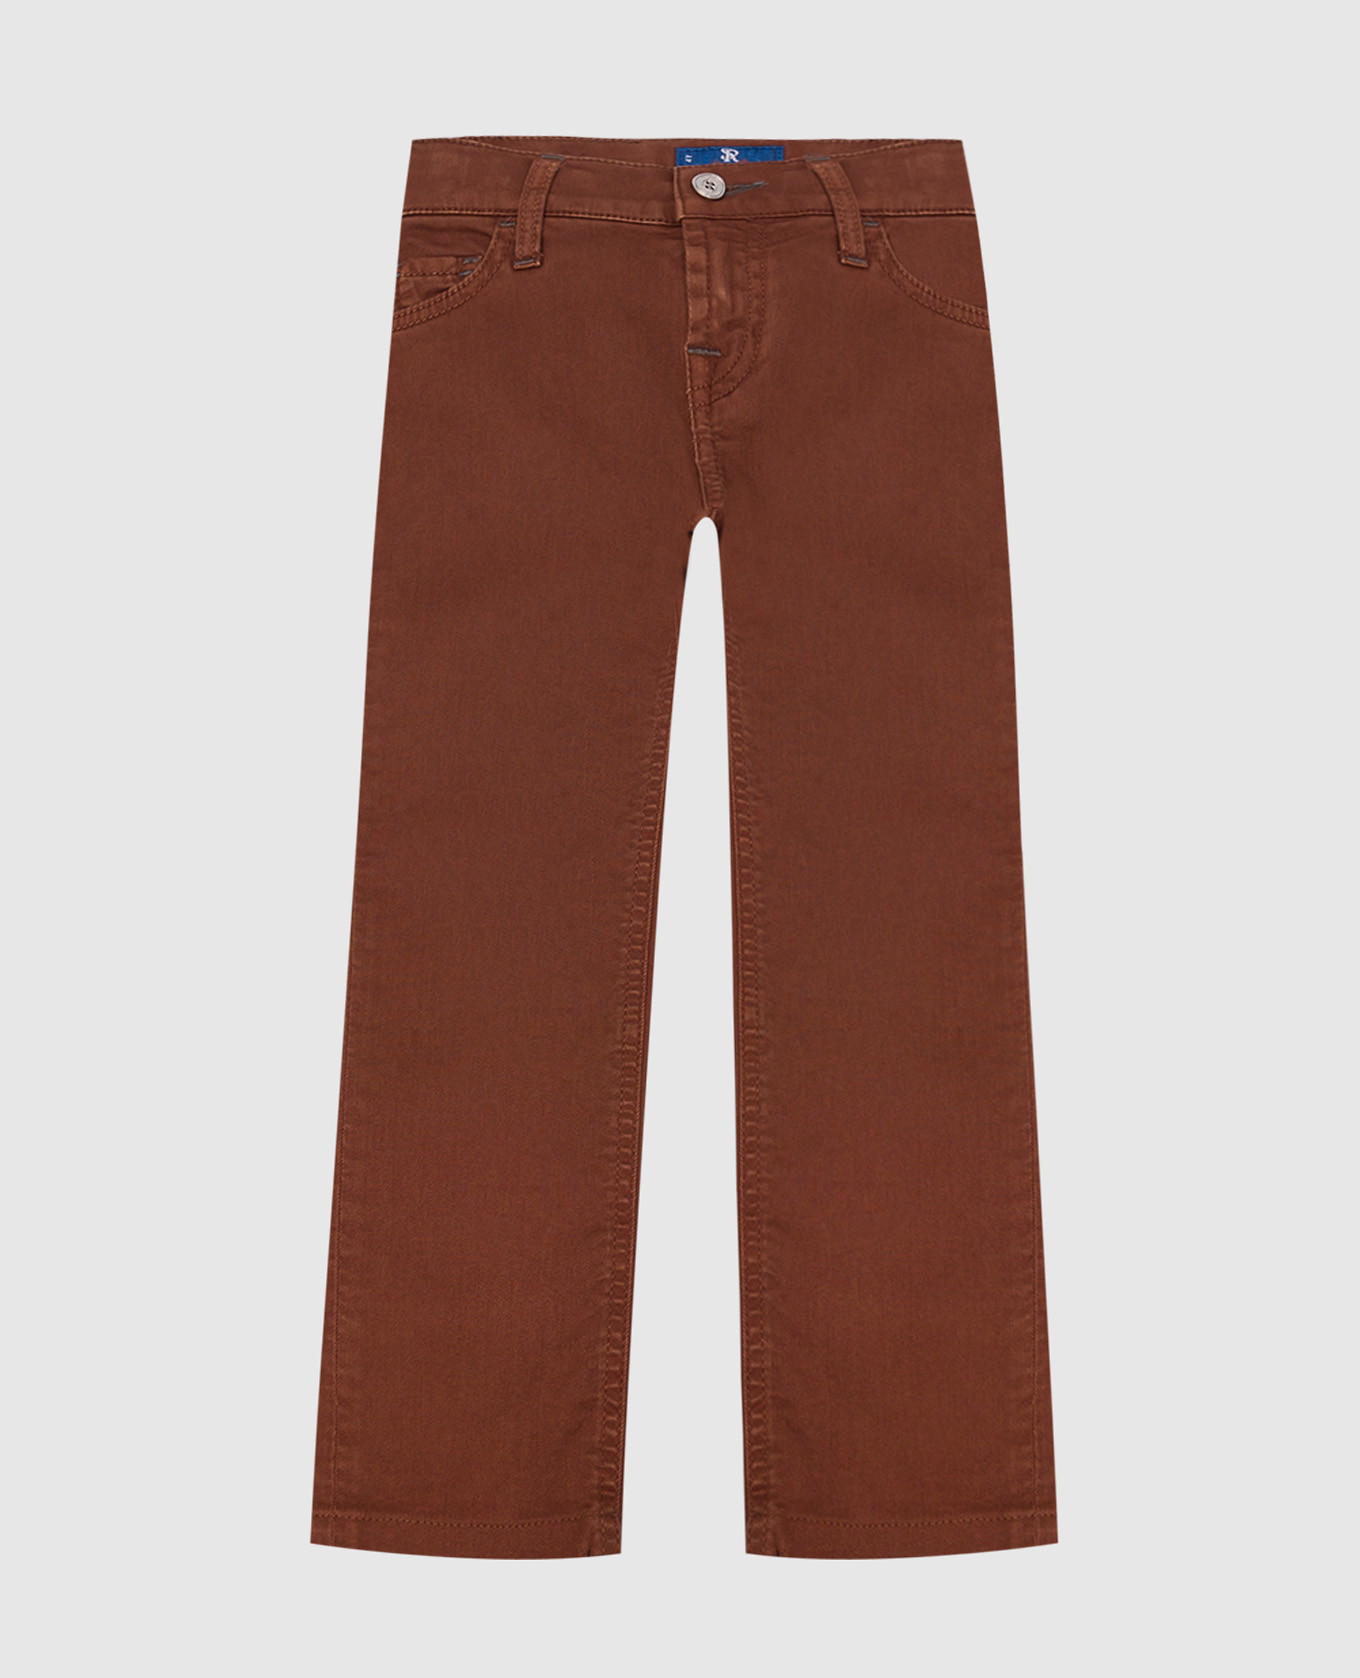 Children's brown jeans with logo embroidery